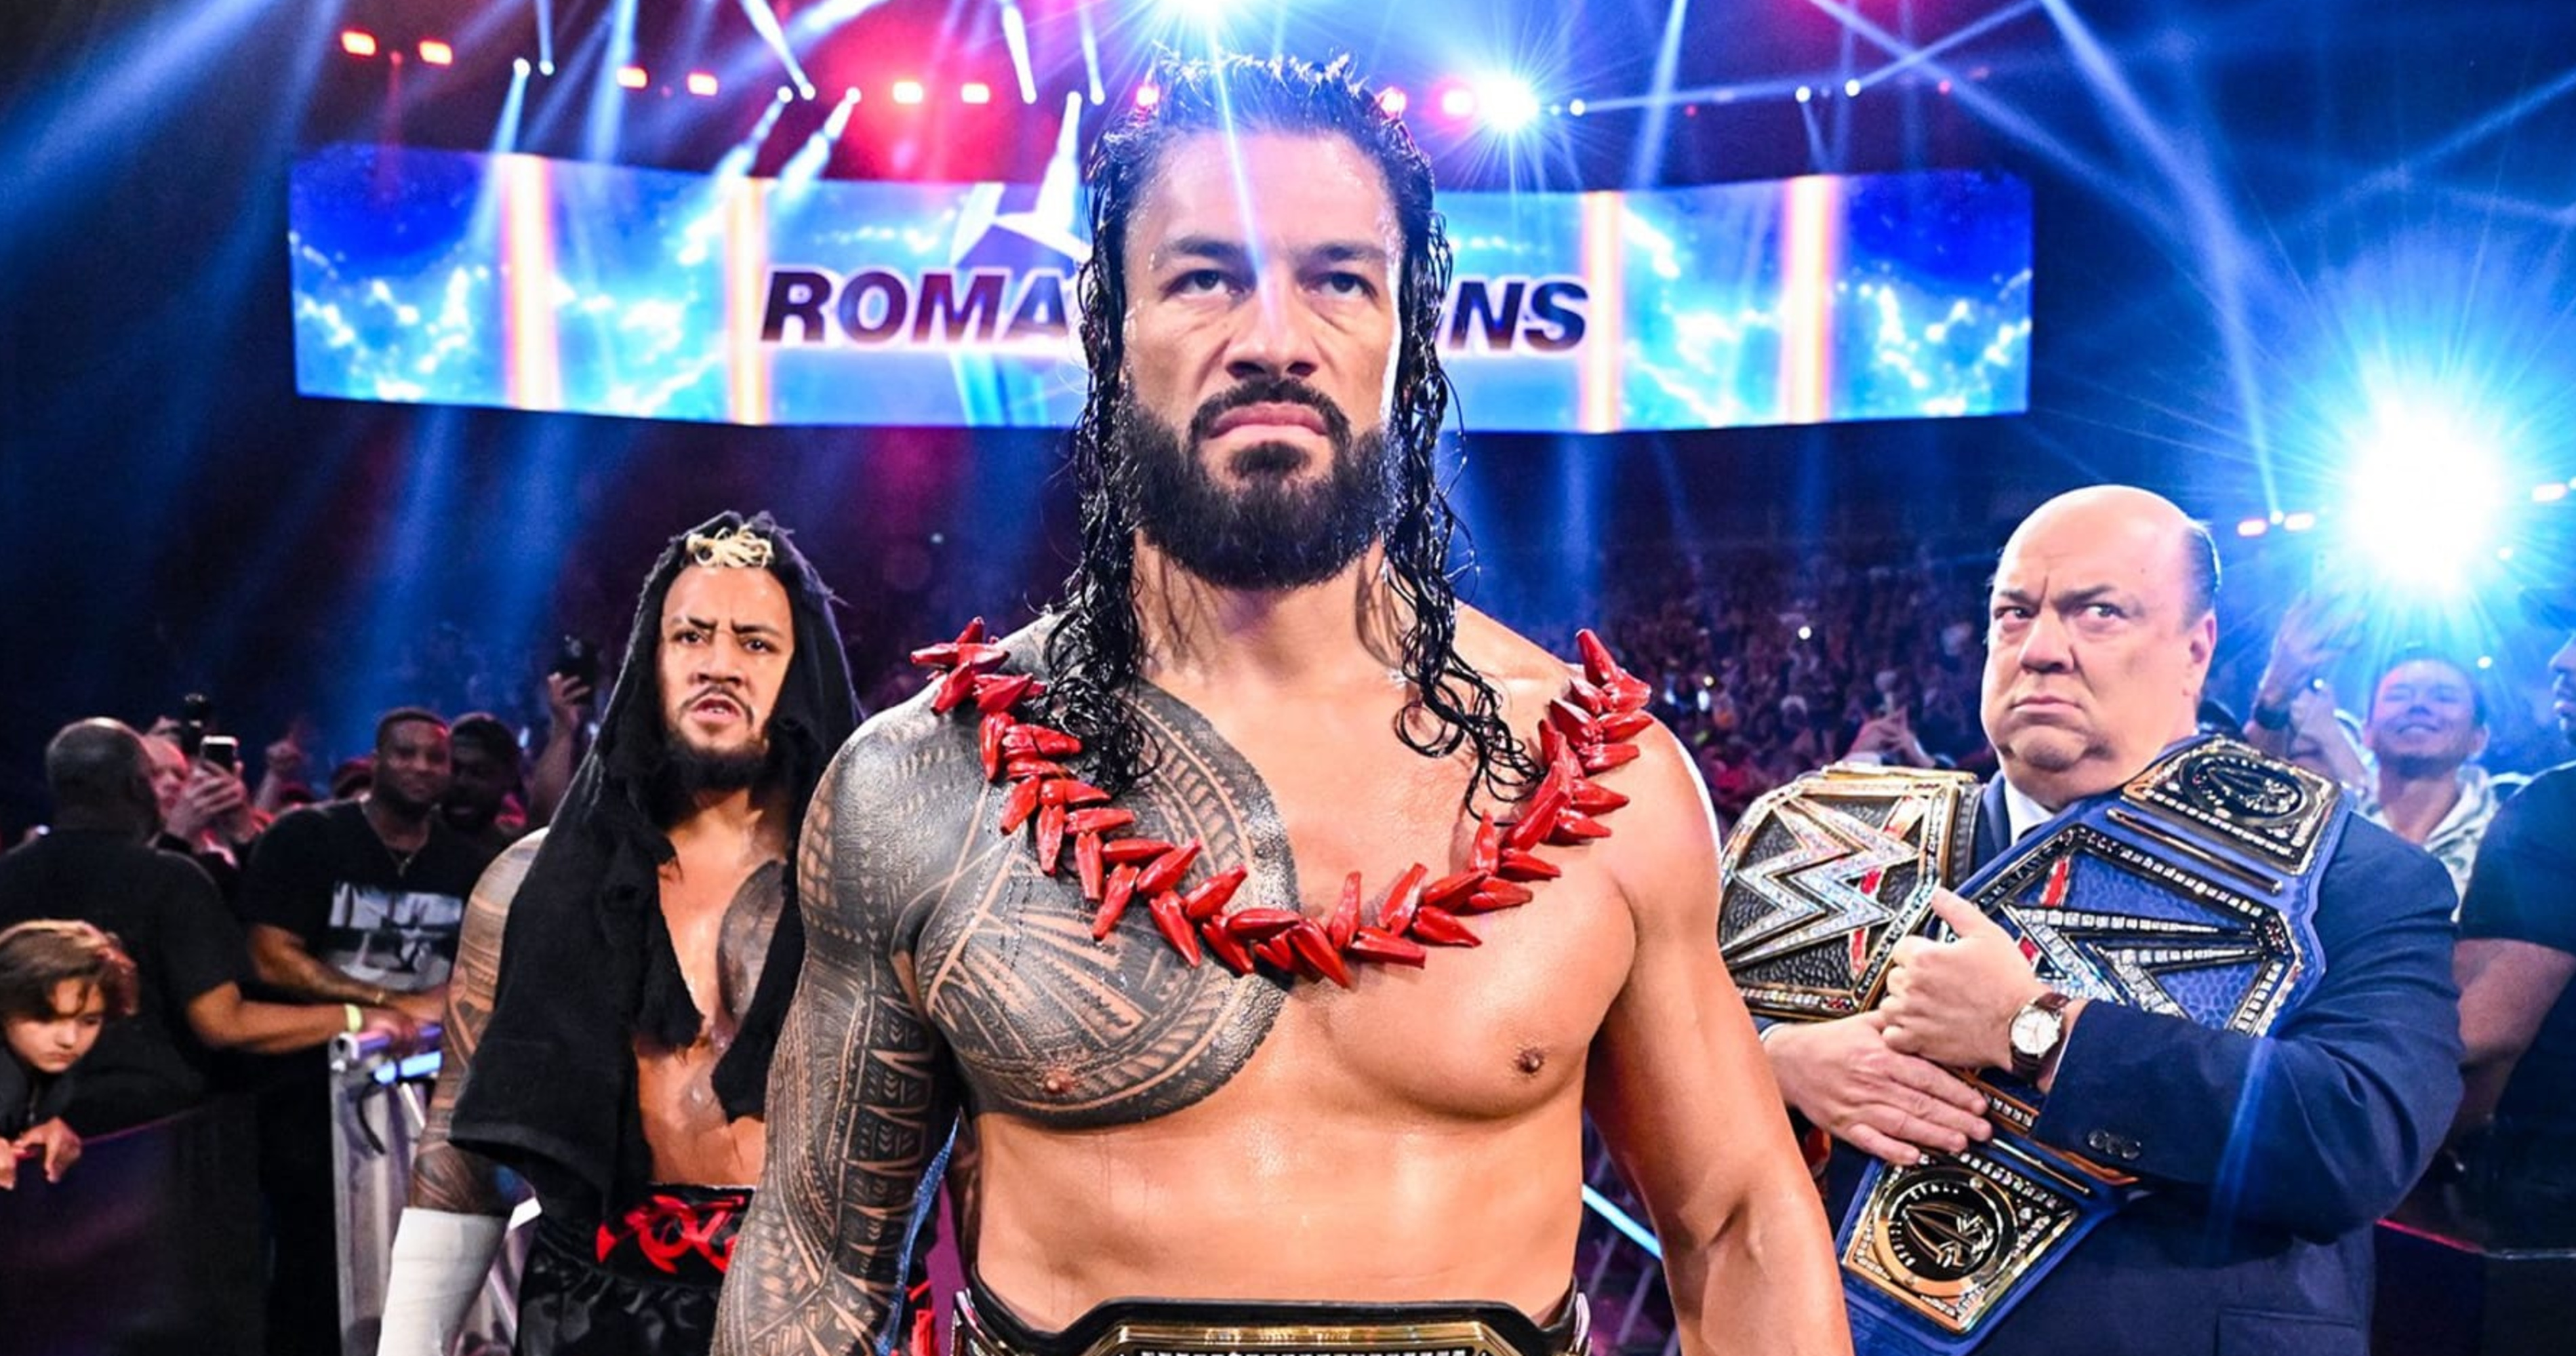 Early Predictions for Roman Reigns, Bloodline and WWE Survivor Series